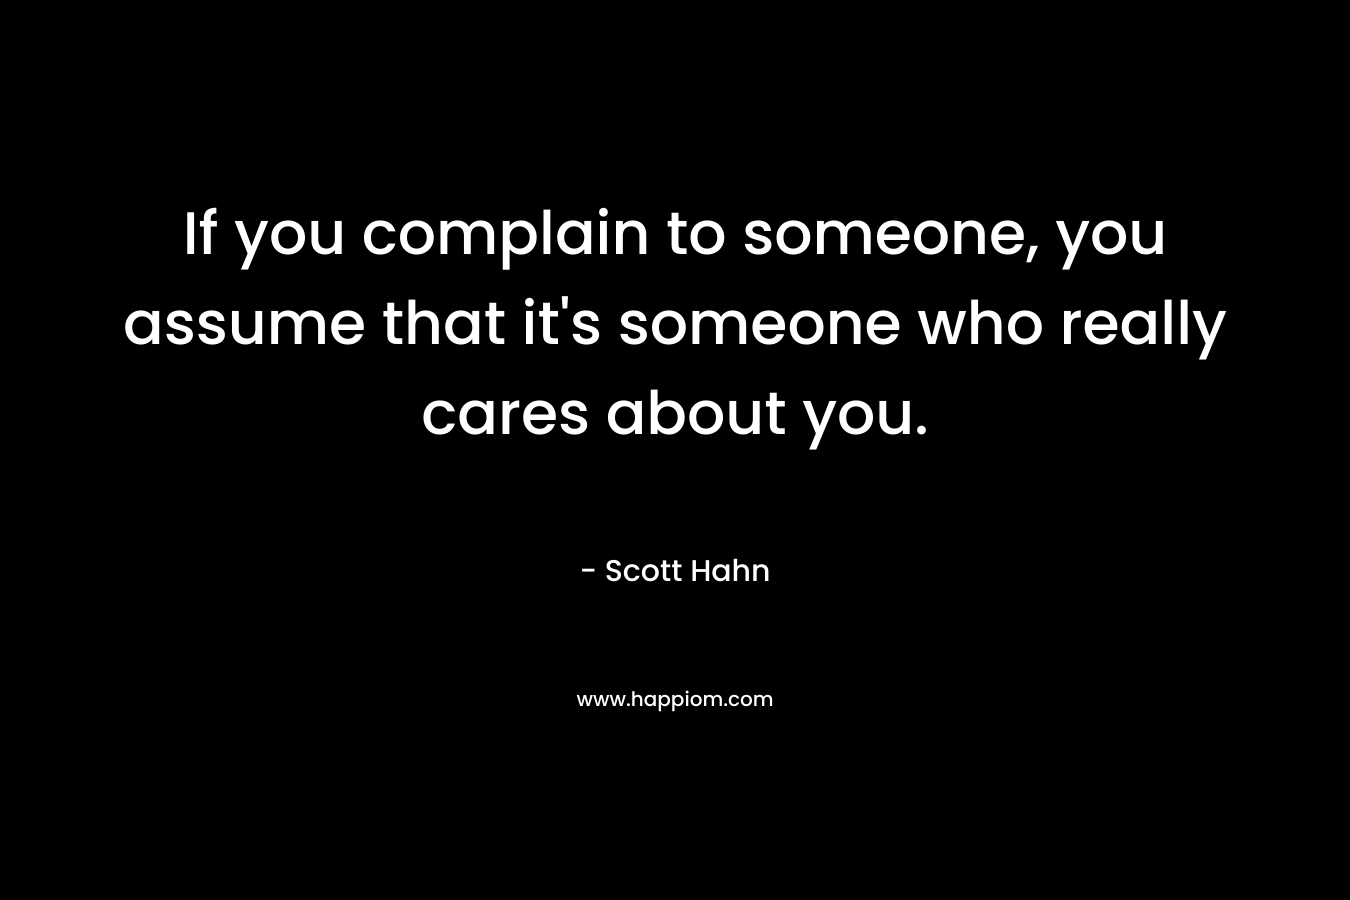 If you complain to someone, you assume that it’s someone who really cares about you. – Scott Hahn